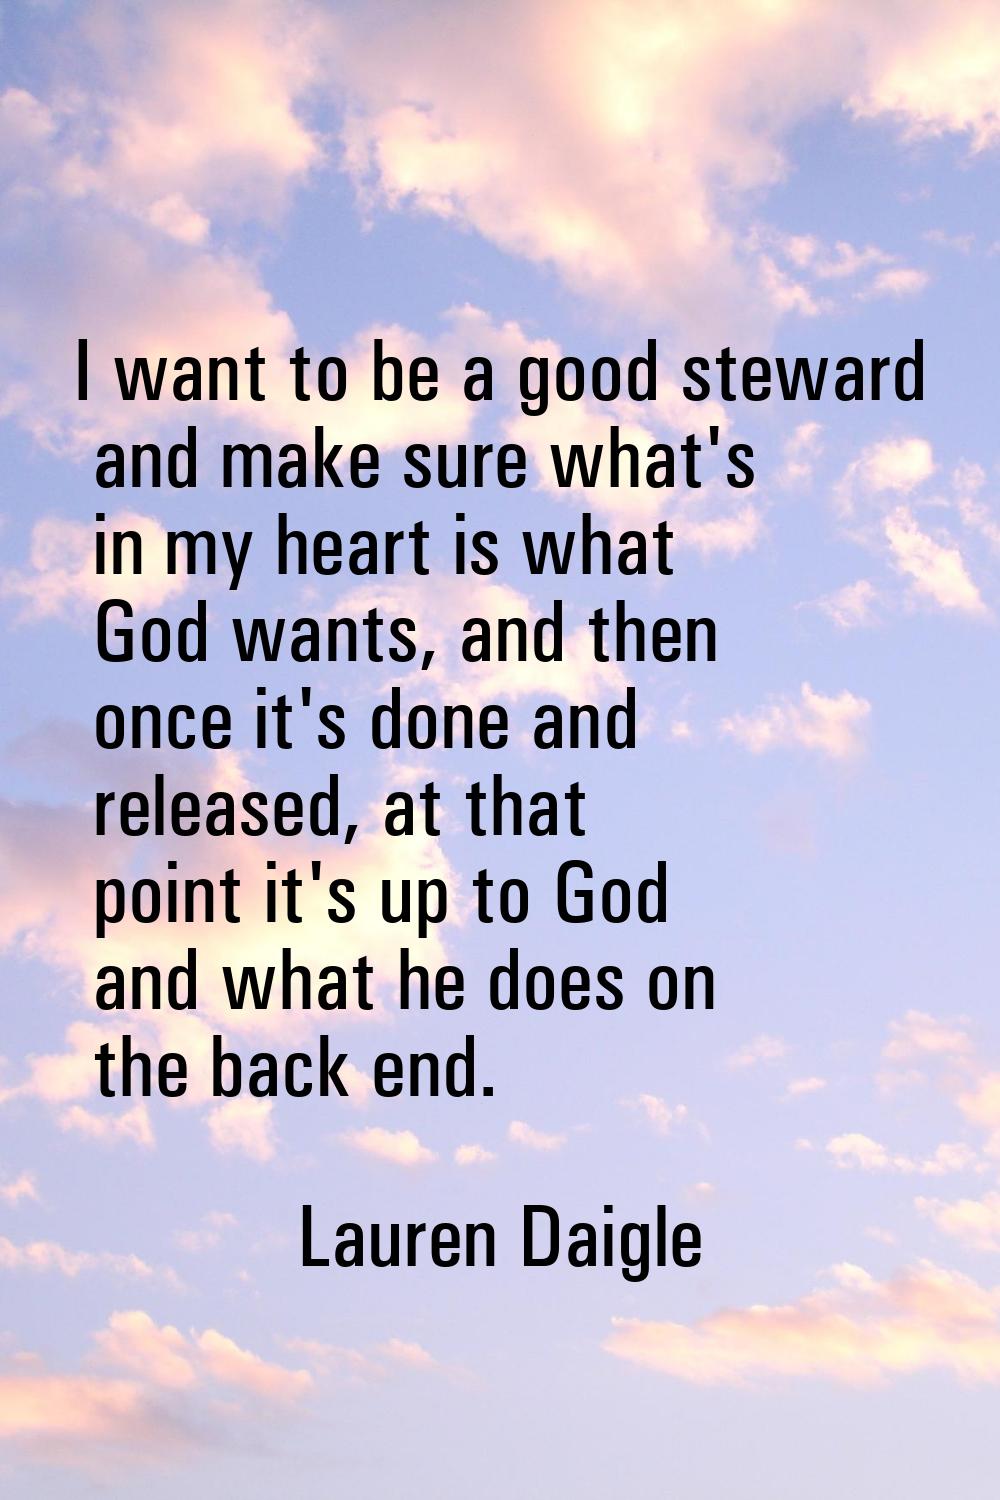 I want to be a good steward and make sure what's in my heart is what God wants, and then once it's 